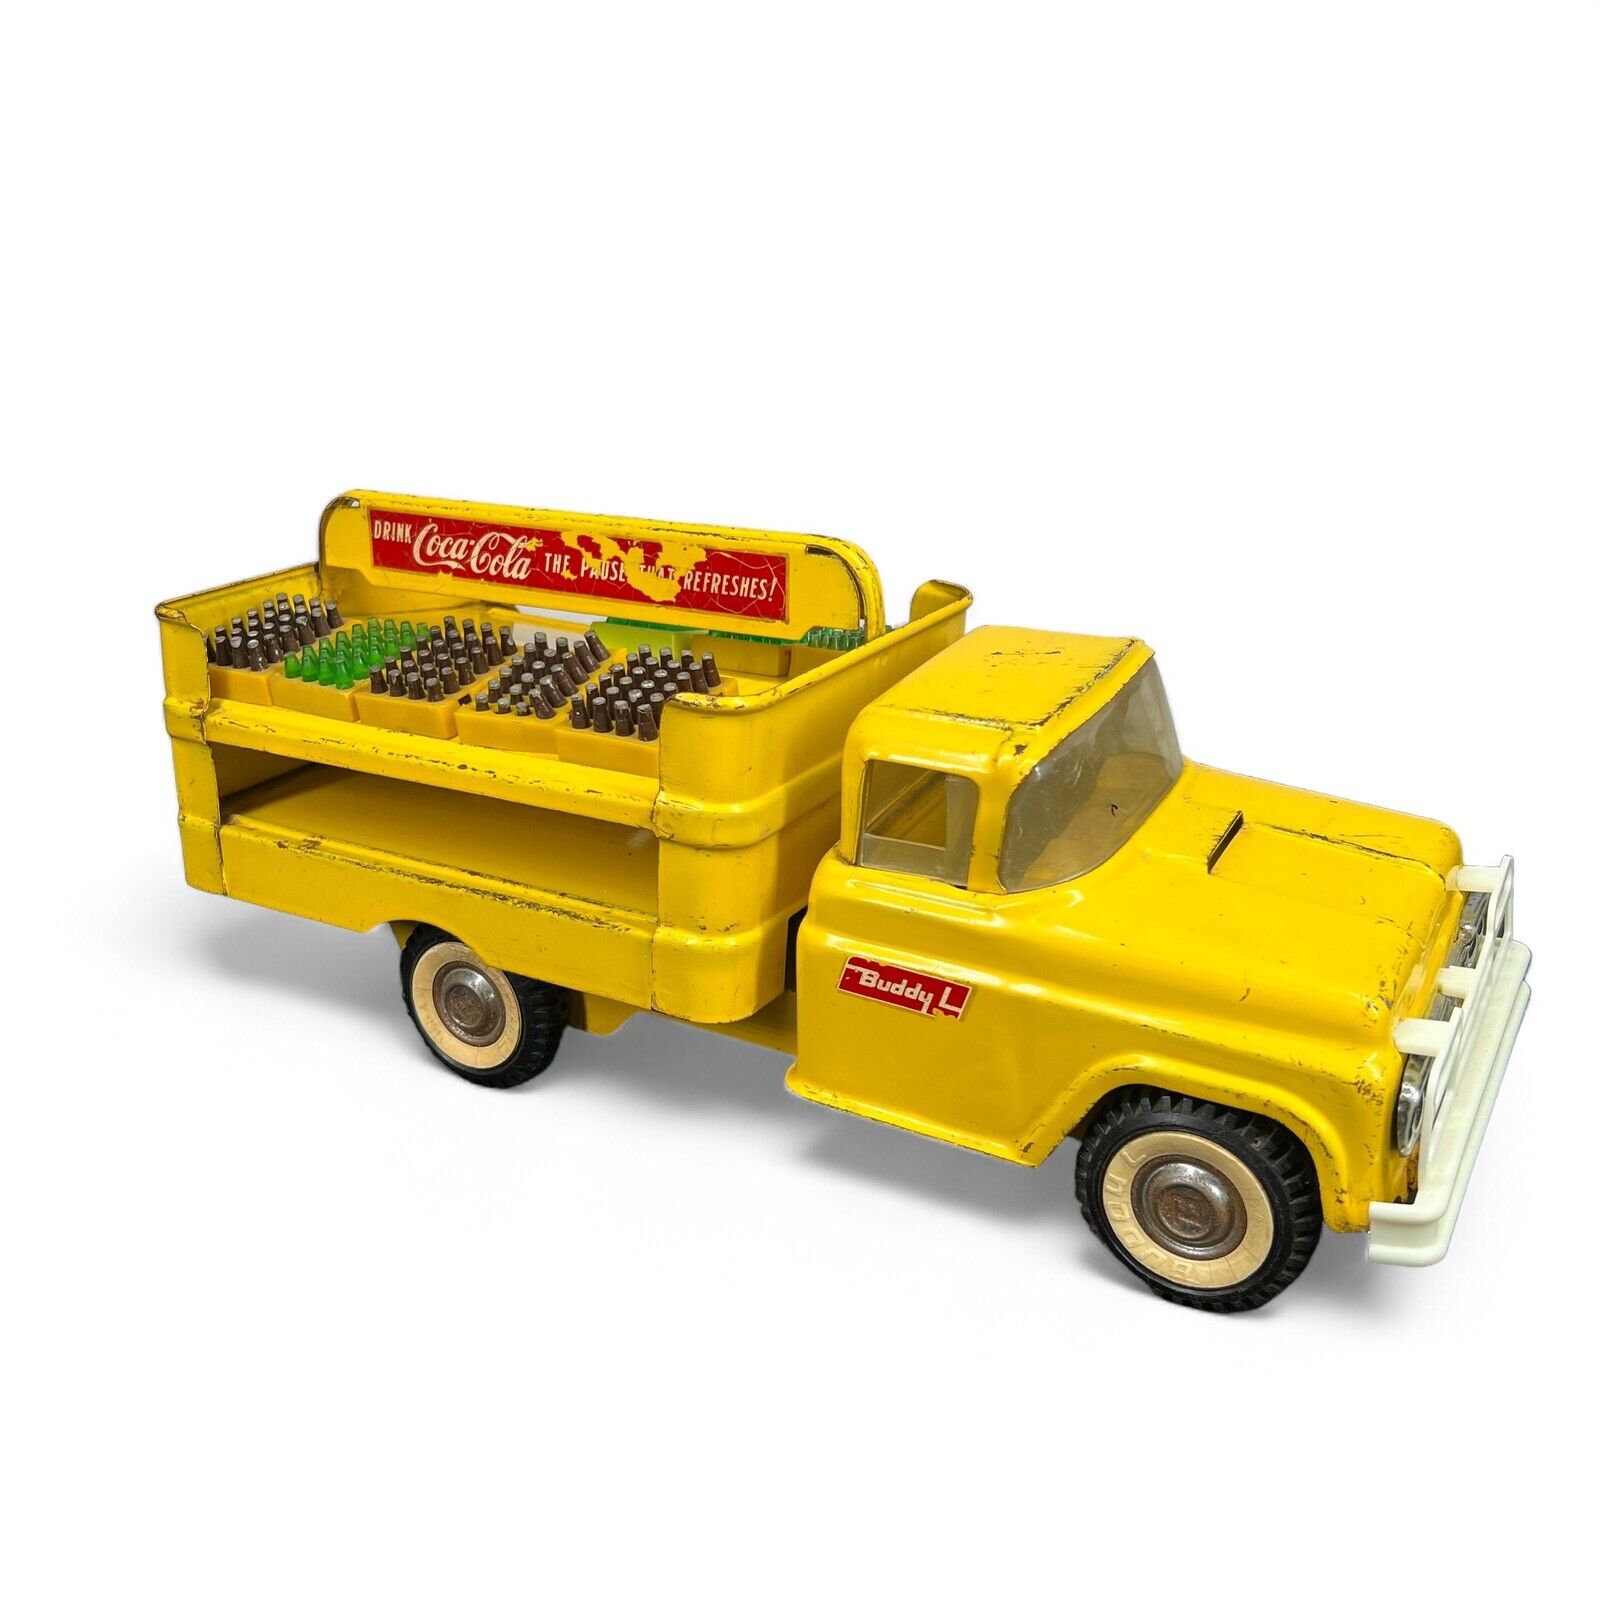 Vintage Buddy L Coca Cola Bottle Delivery Truck Pressed Steel Yellow